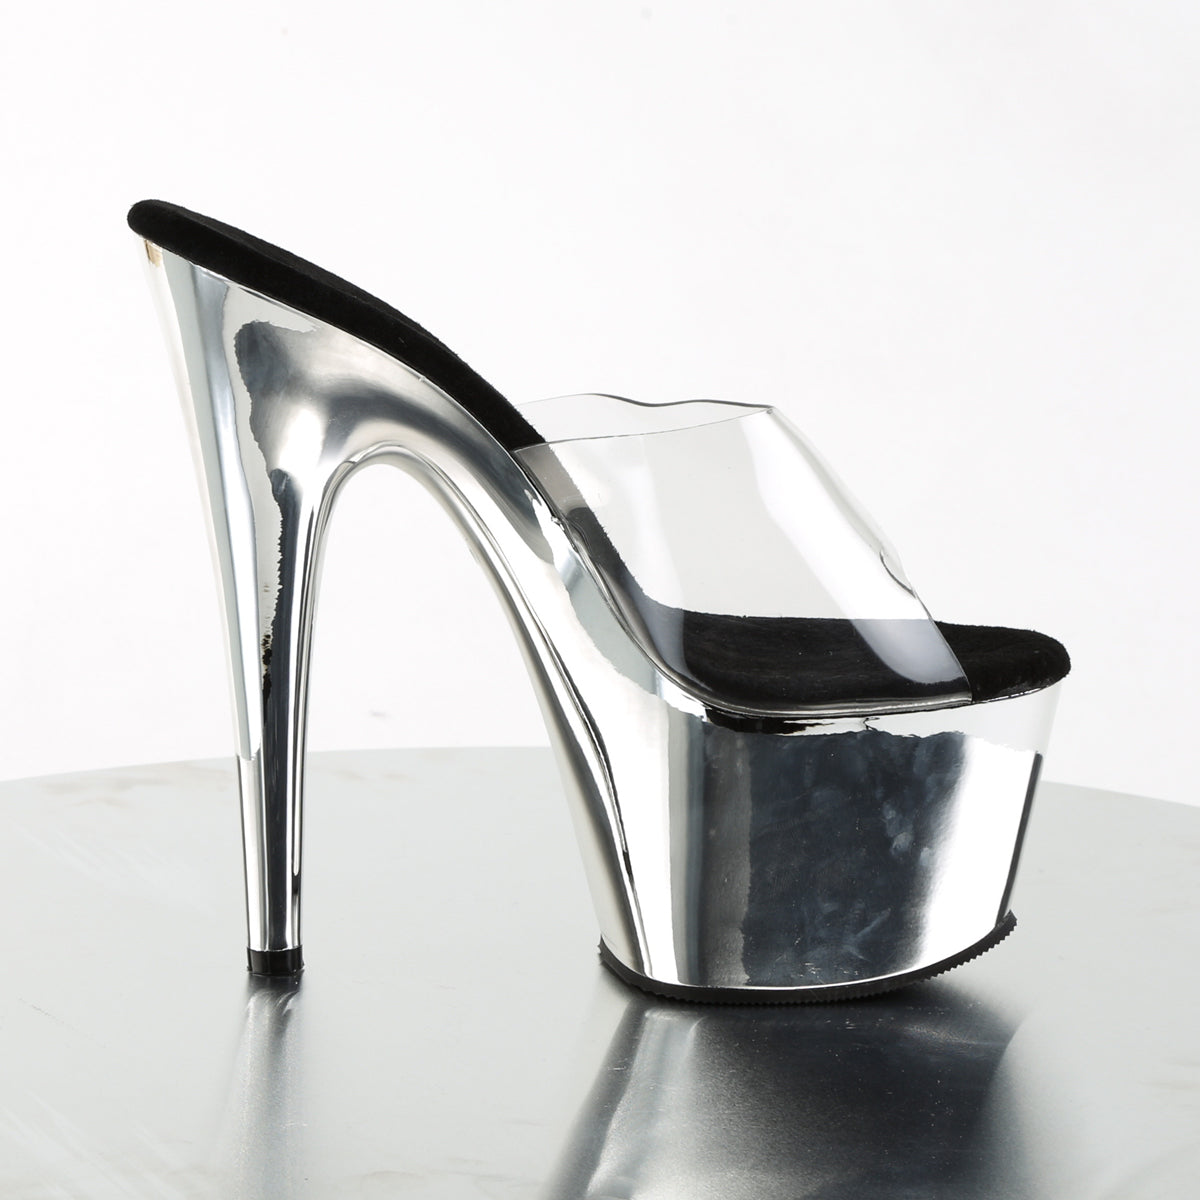 ADORE-701 / C / SCH 7 "PLEASER FAST DELIVERY 24-48h 